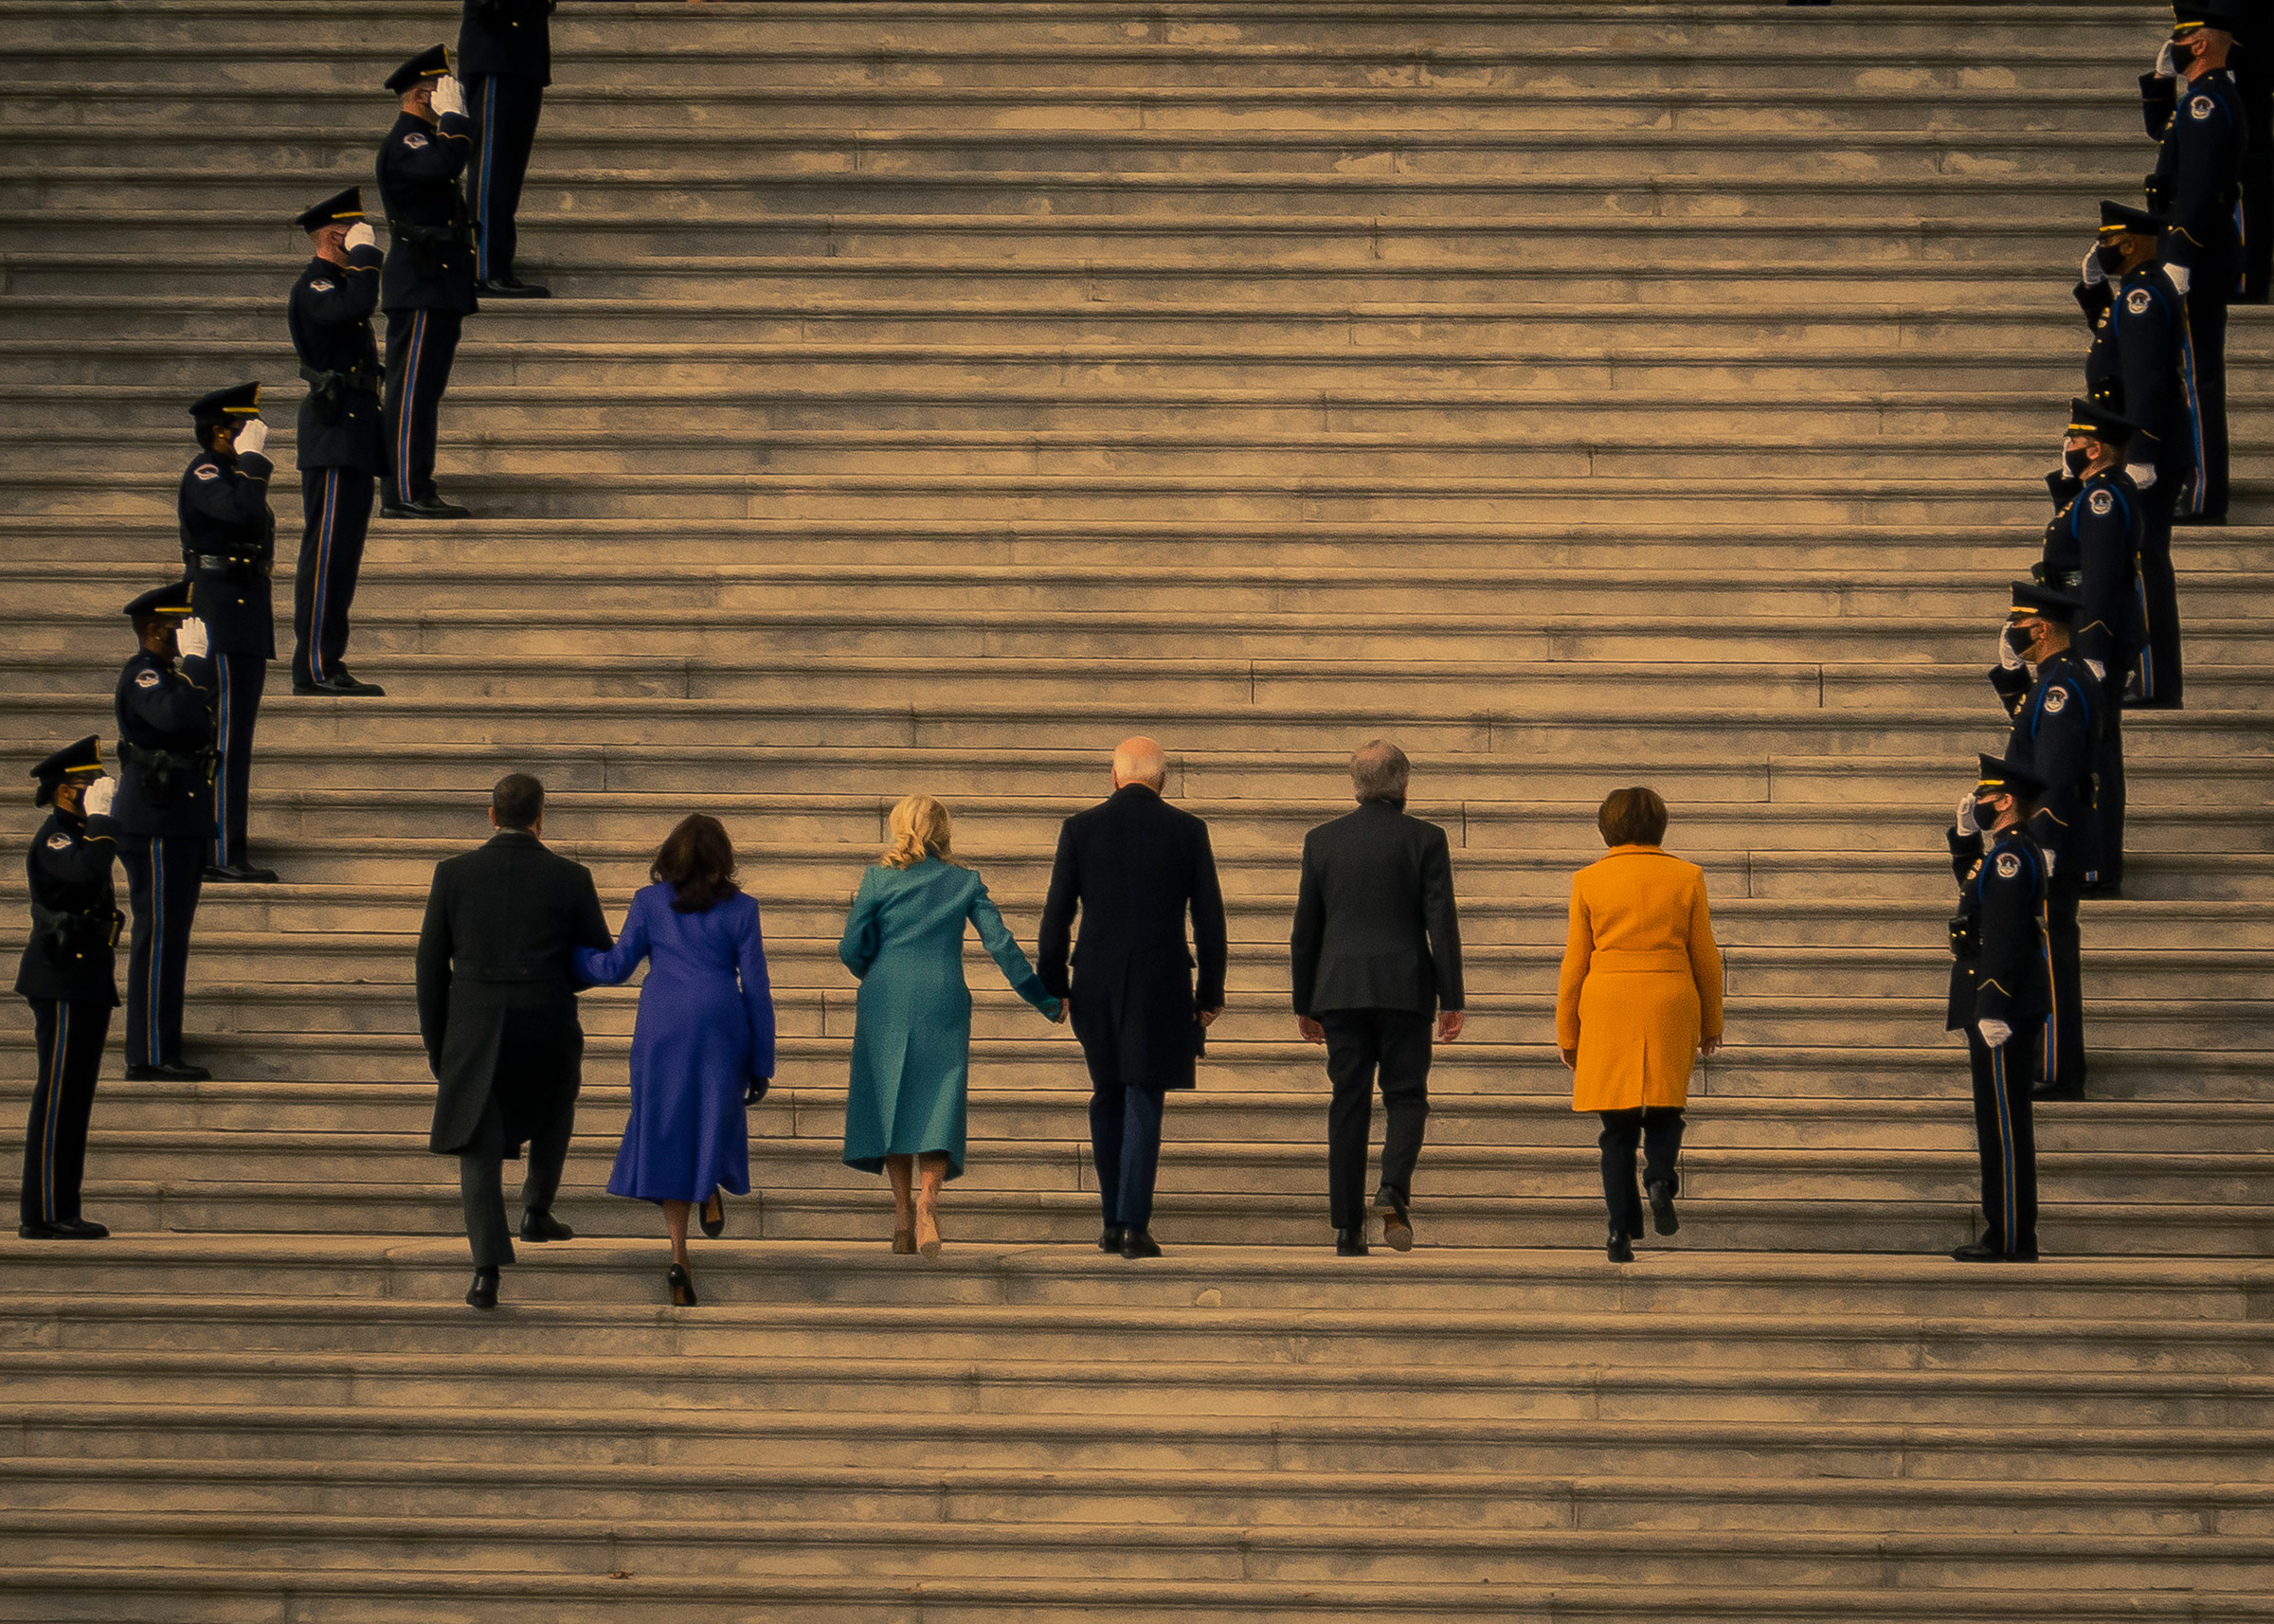 President-elect Joe Biden and Vice President-elect Kamala Harris arrive at the East Front steps of the U.S. Capitol prior the 2021 Presidential Inauguration. (Dina Litovsky for TIME)